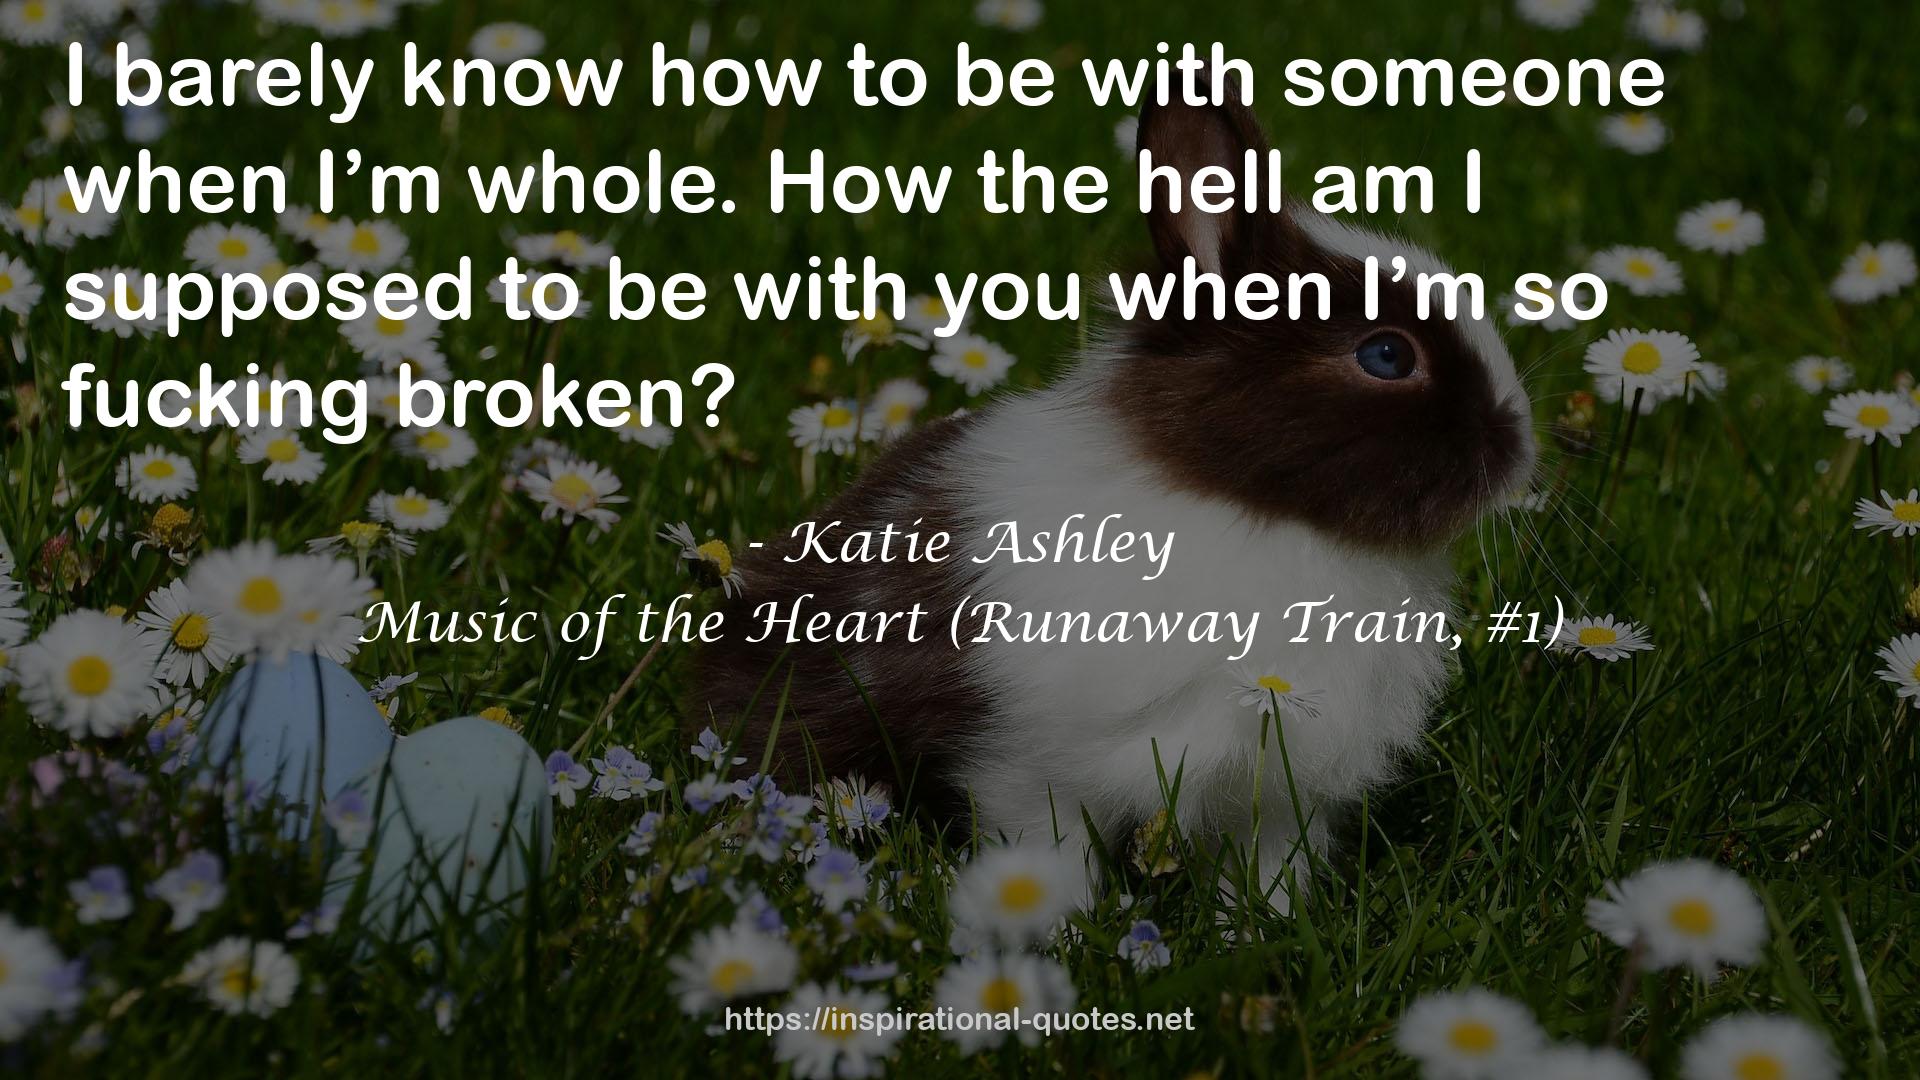 Music of the Heart (Runaway Train, #1) QUOTES